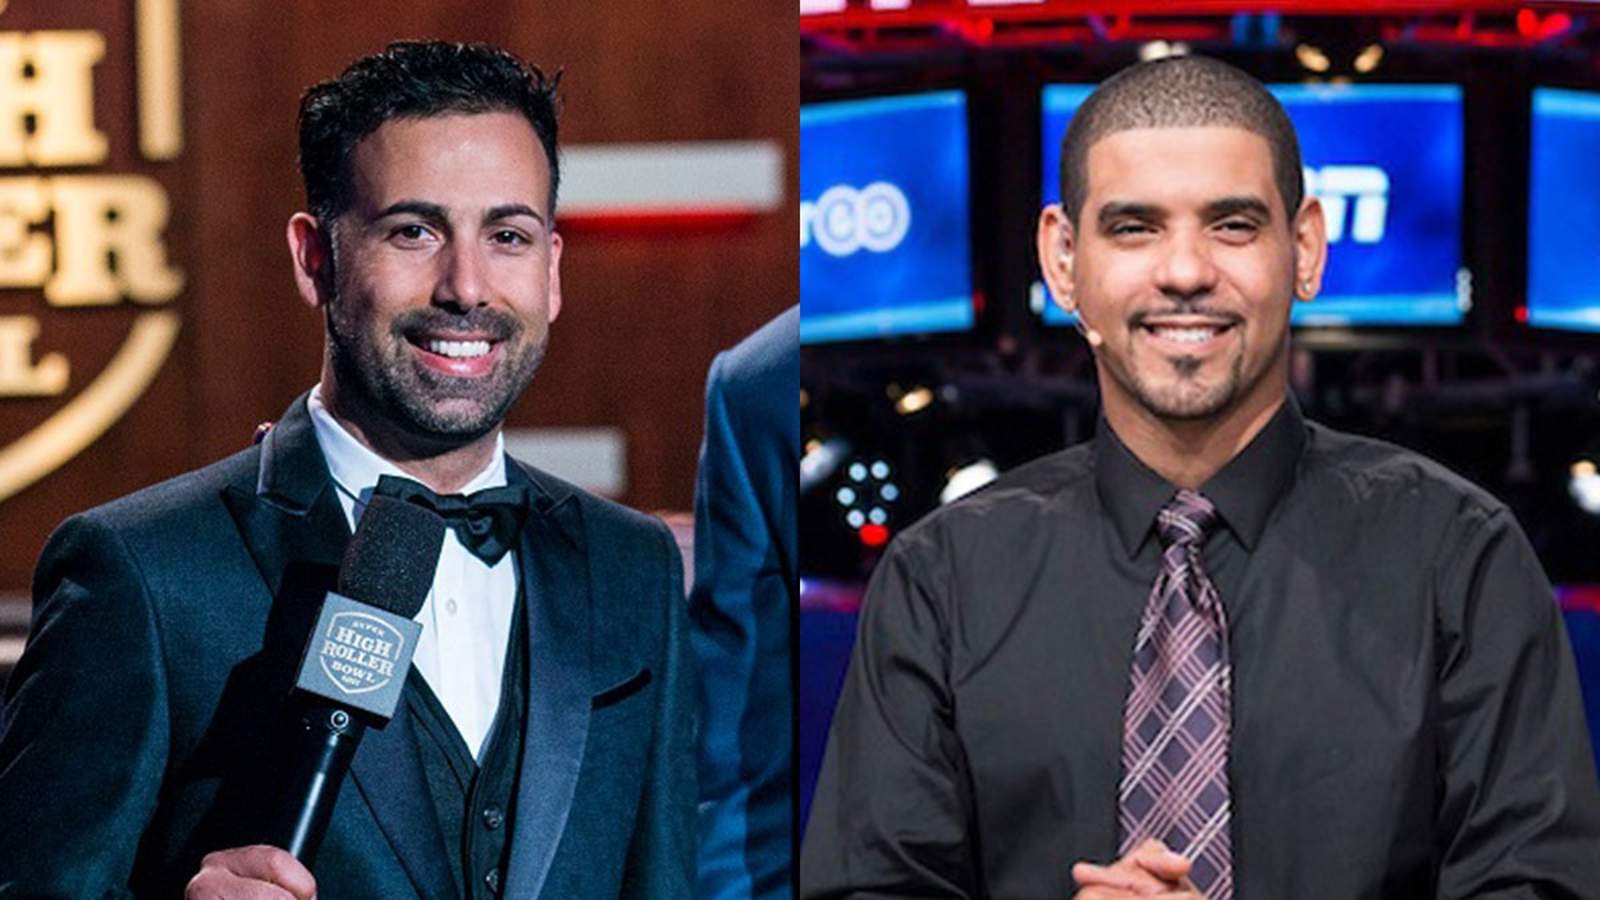 David Williams & Ali Nejad on the Call for the Poker Masters